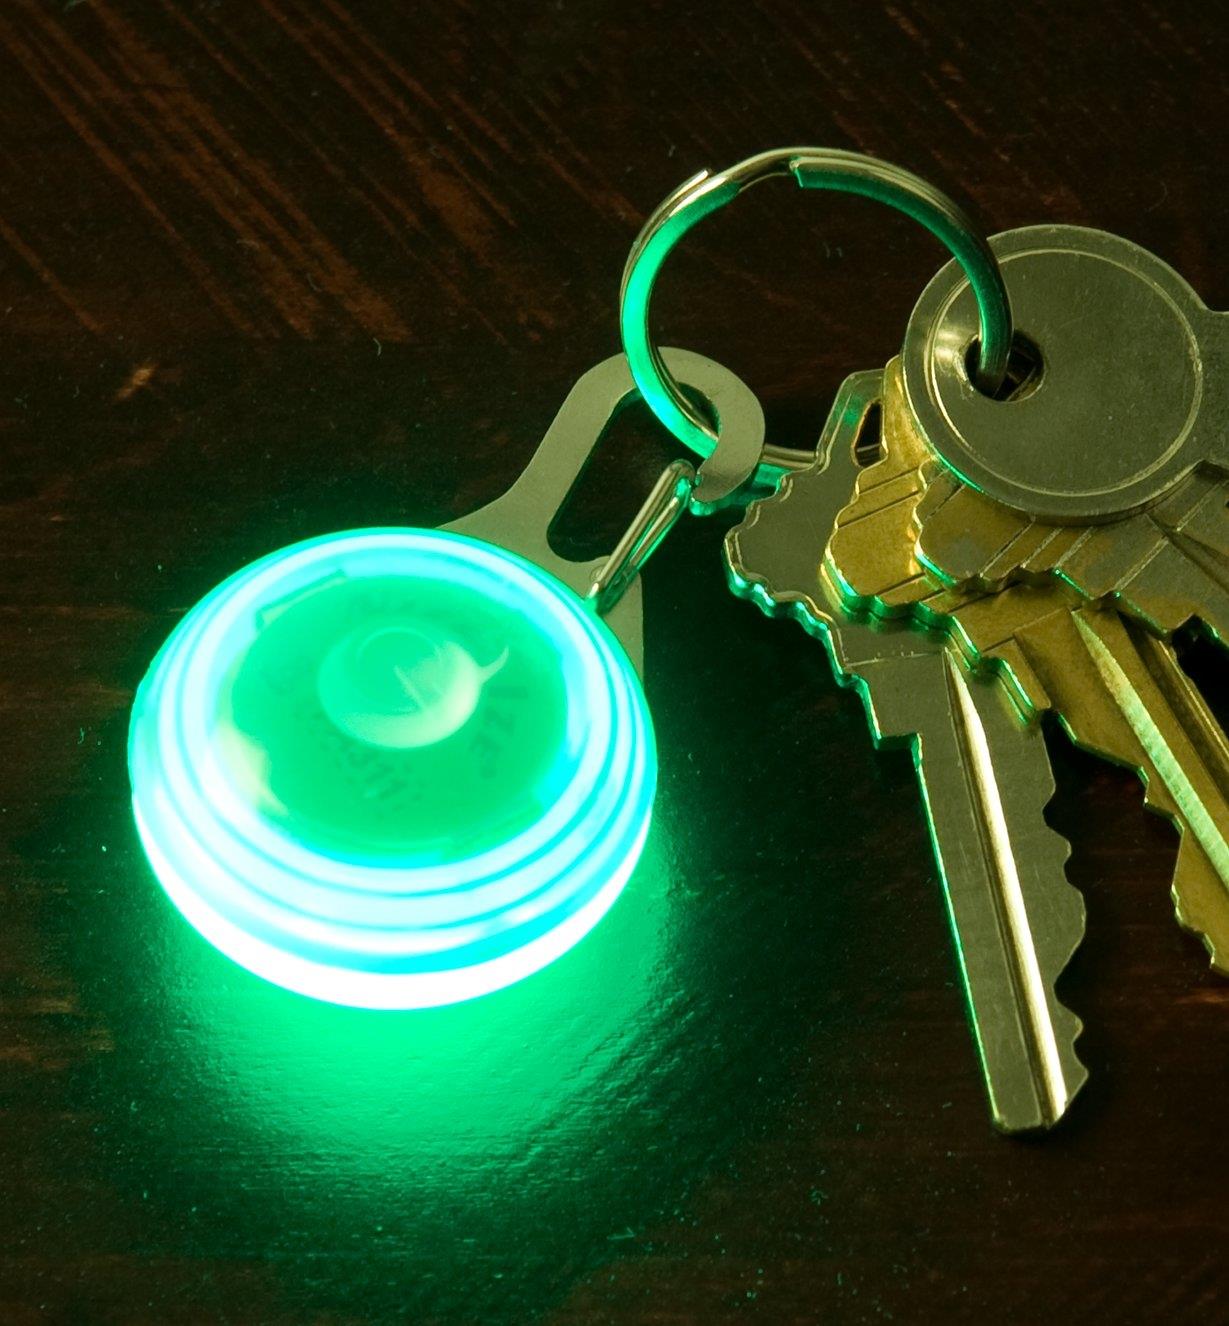 Green Carabiner Light attached to a set of keys